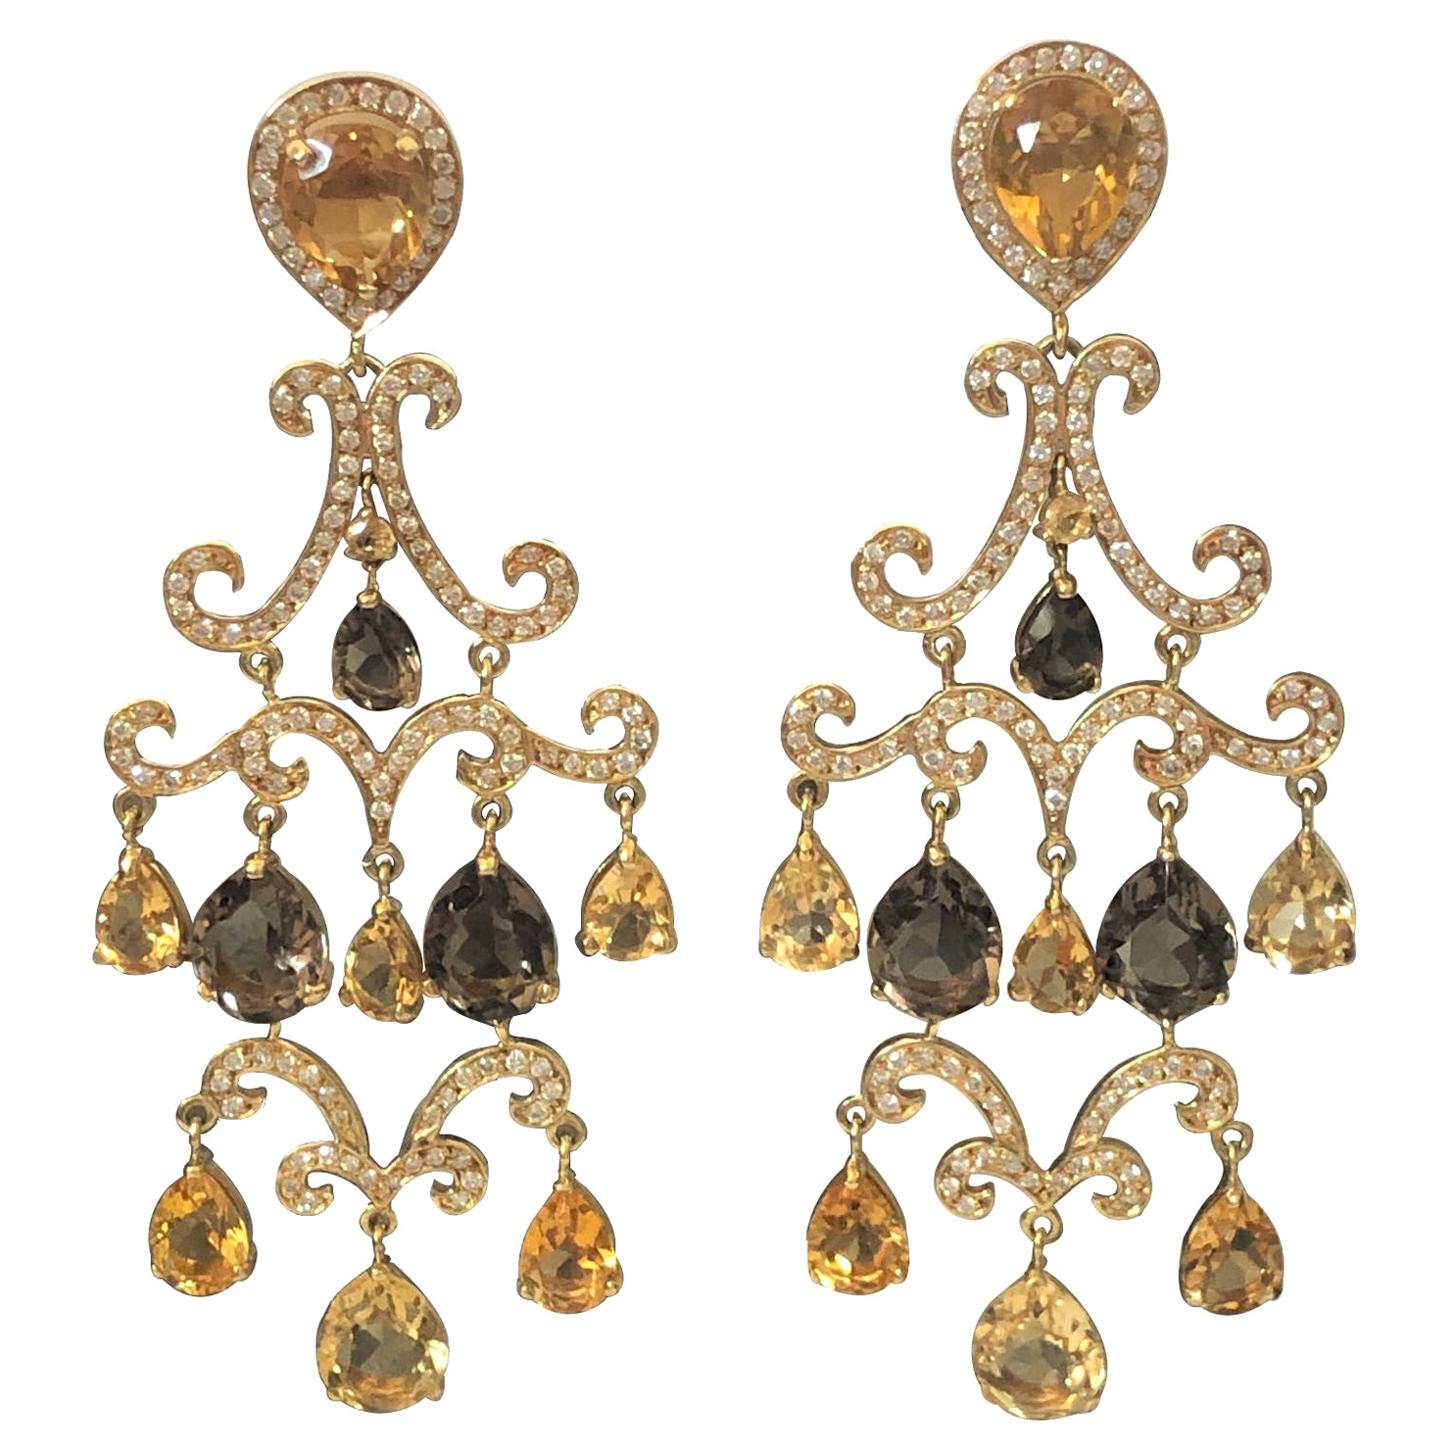 Large and Impressive Gold Diamond and Citrine Chandelier Earrings